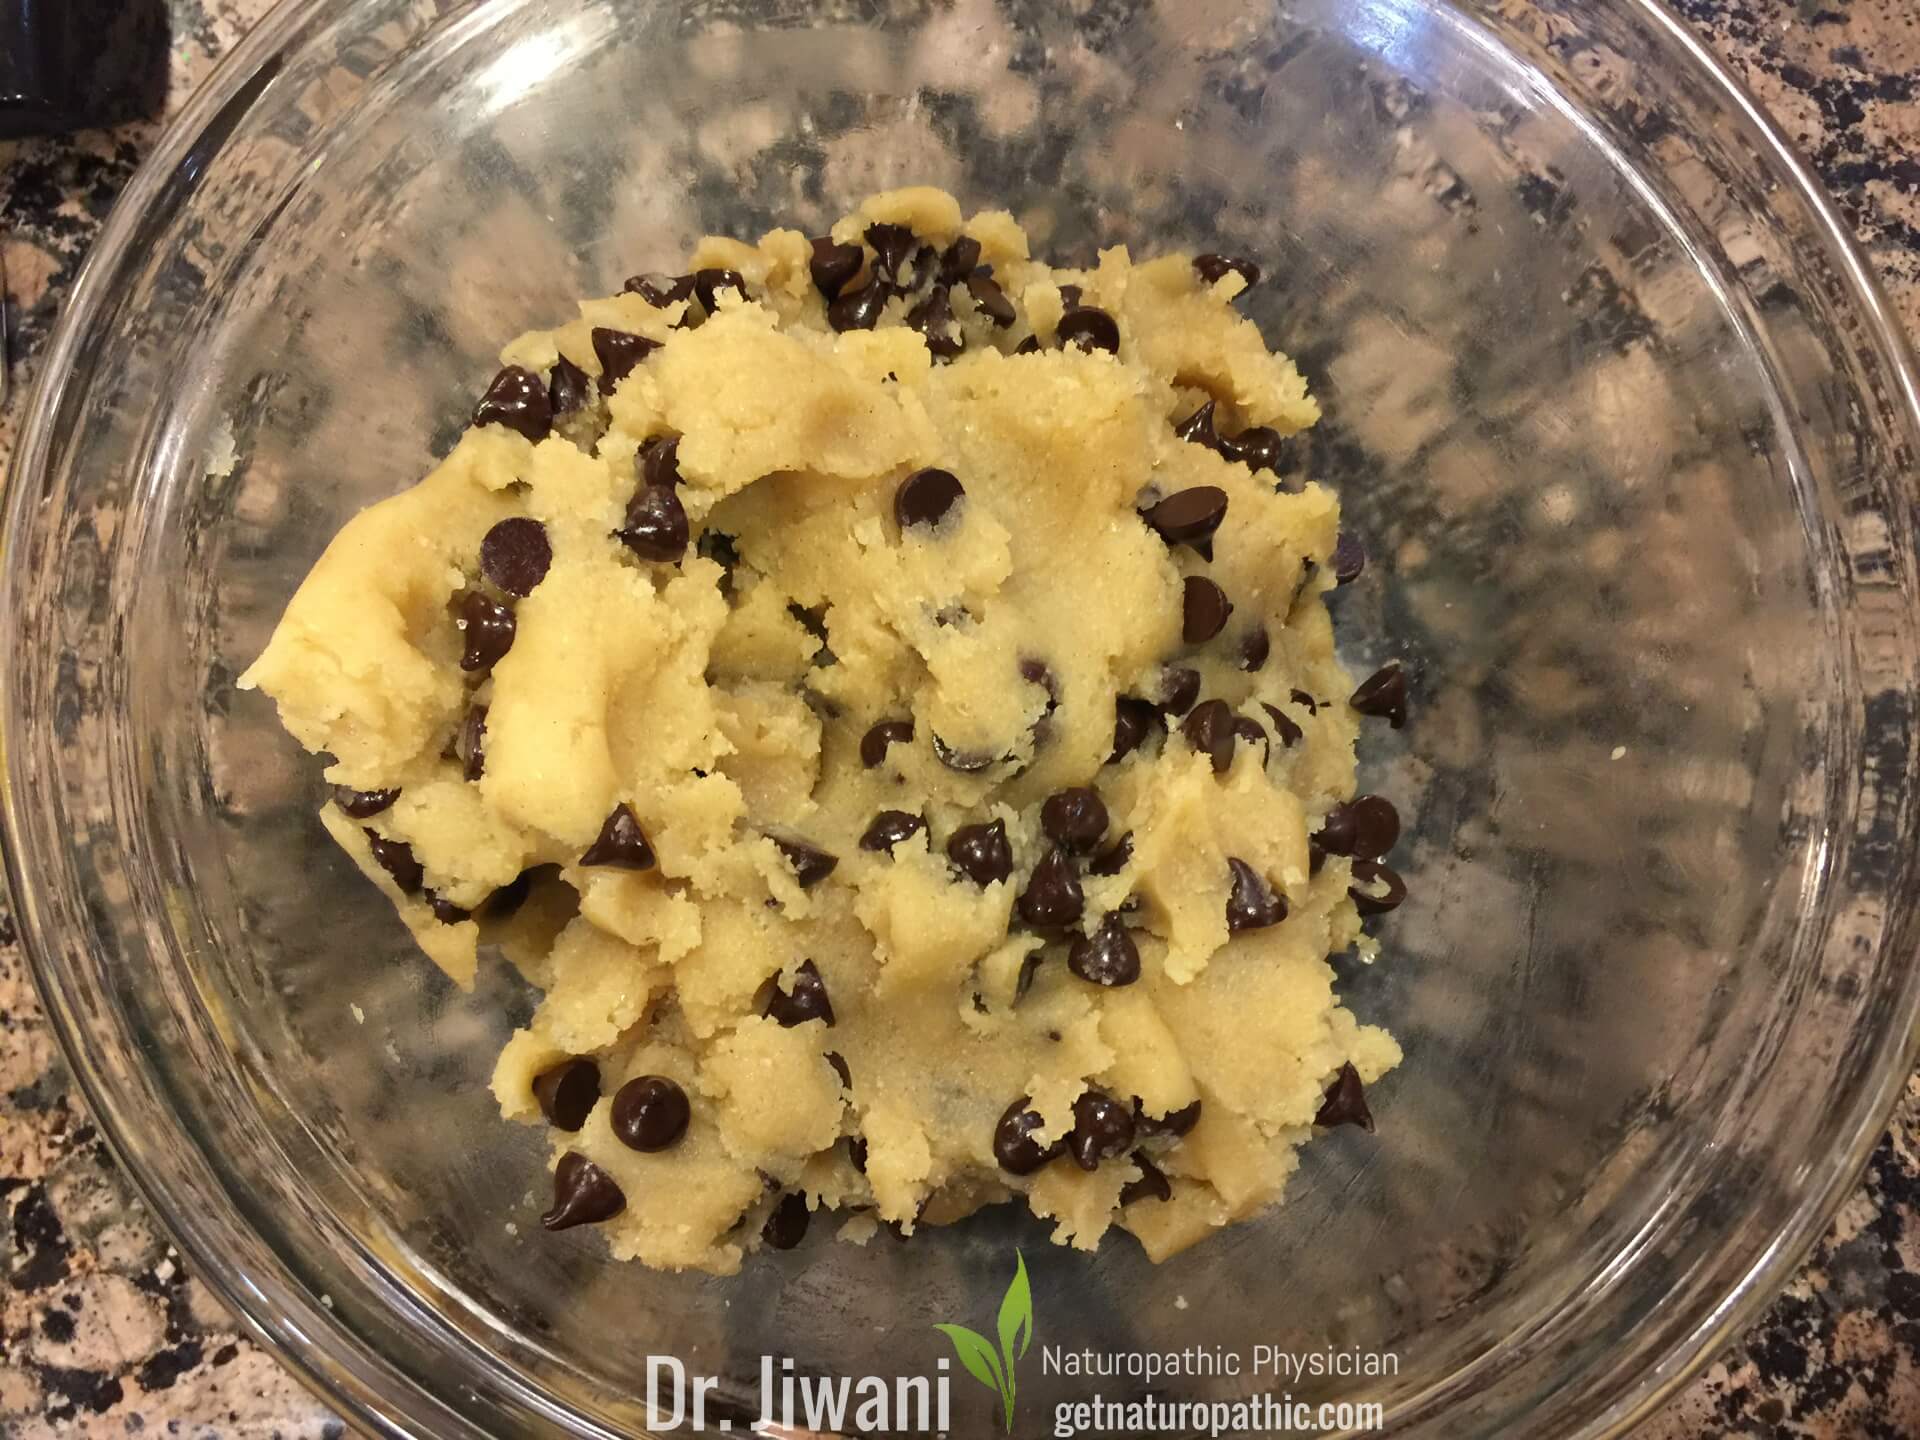 Dr. Jiwani’s Guilt-Free Chocolate Chip Cookies are ideal for those looking for an old school favourite, yet Low Carb, Gluten-Free, Egg-Free, Dairy-Free, Soy-Free, Corn-Free, suitable for even those following Paleo, Keto, Vegan & Grain-Free Diets | Dr. Jiwani's Naturopathic Nuggets Blog